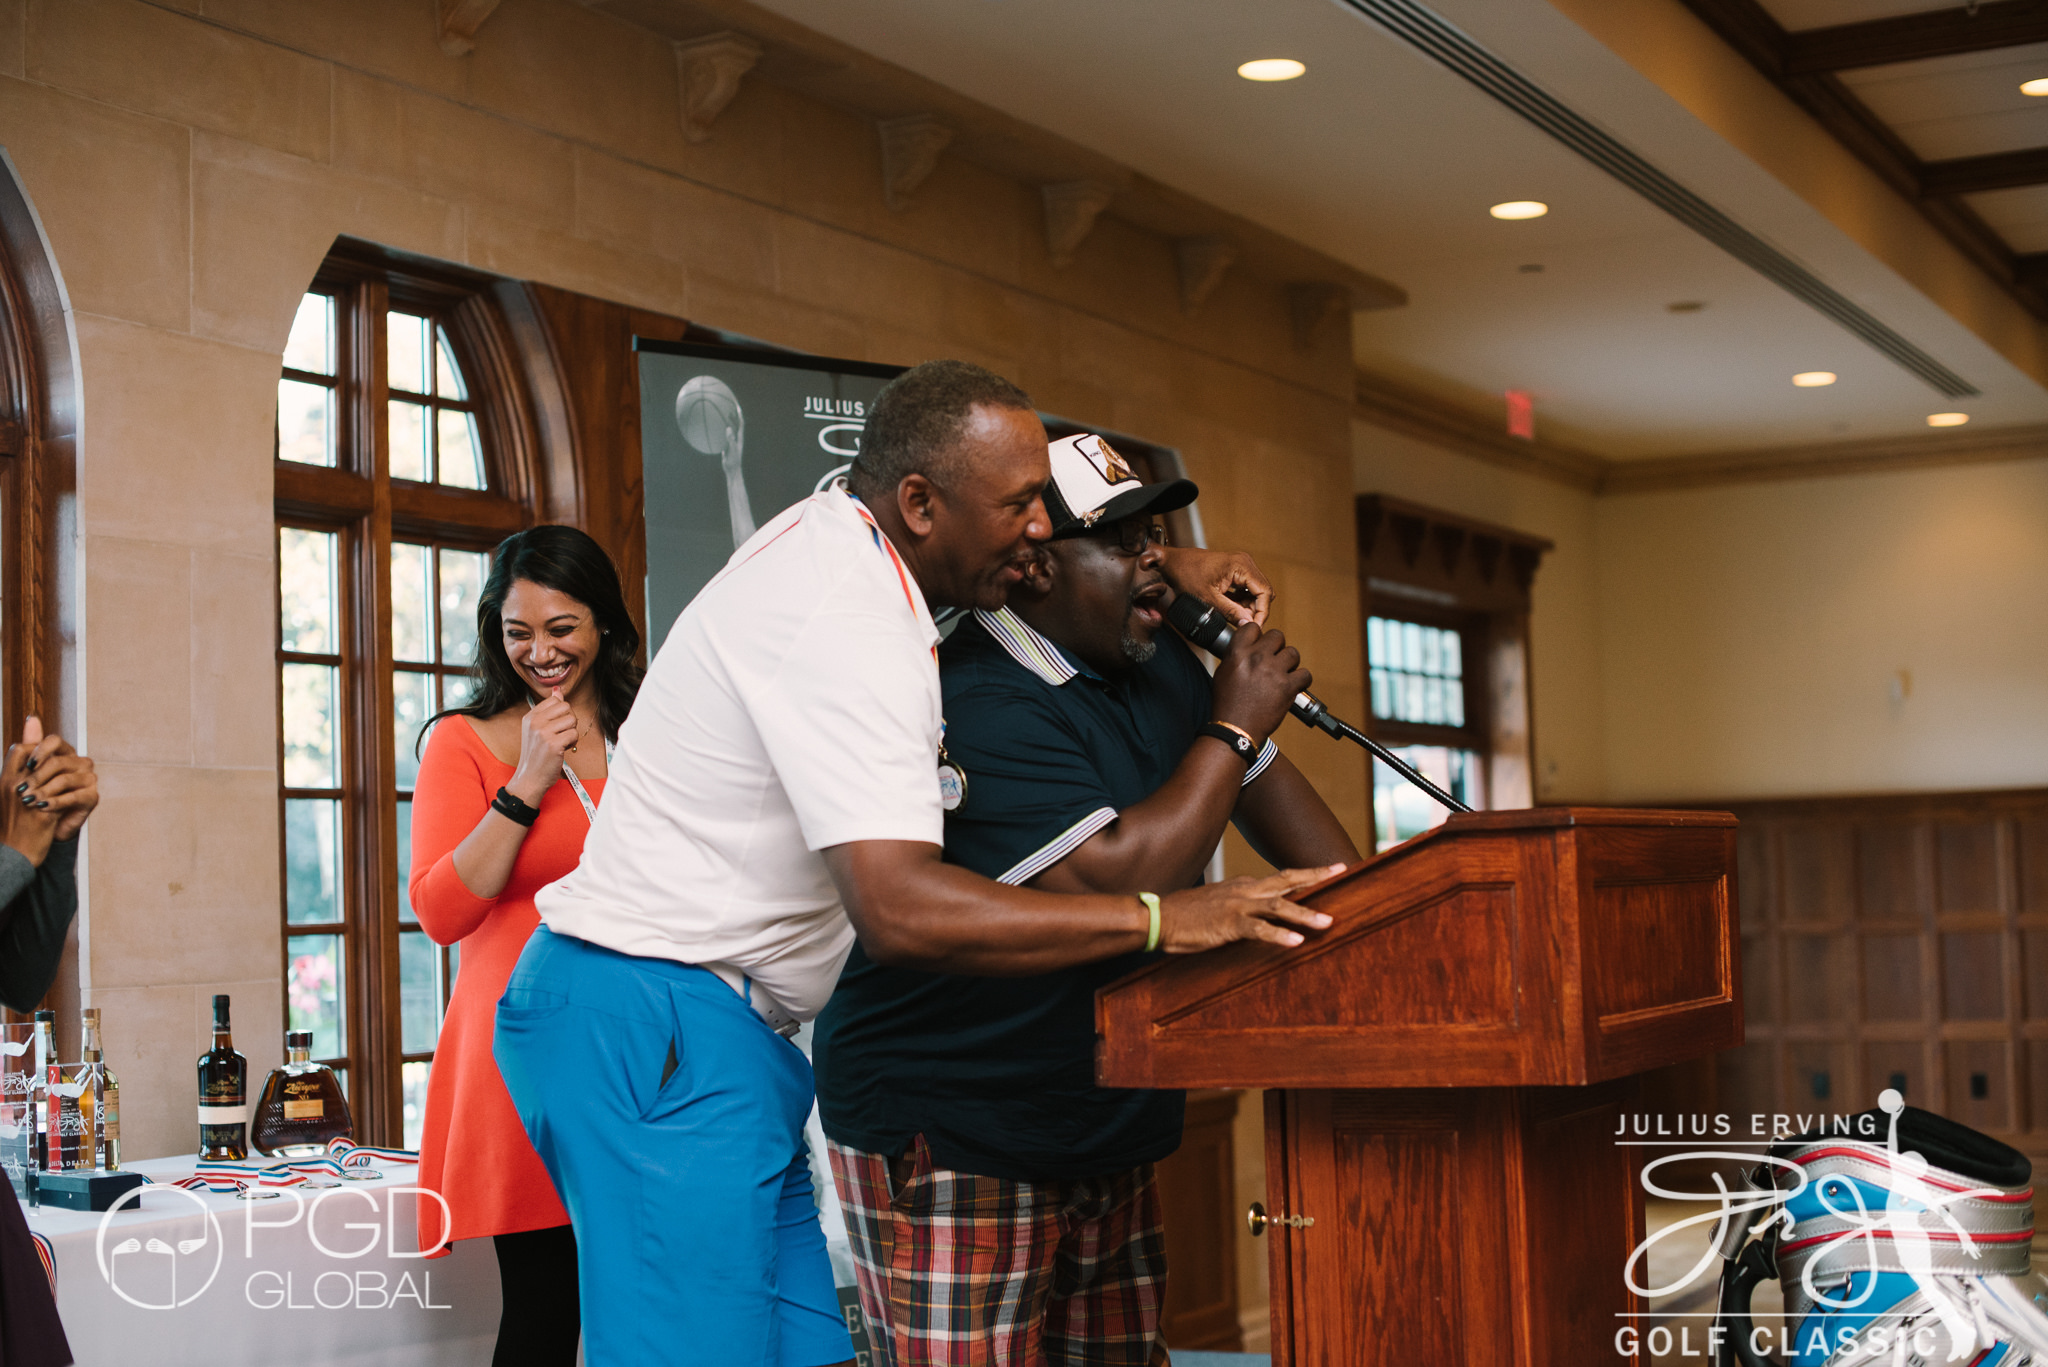 MLB Legend Joe Carter and Actor & Comedian Cedric The Entertainer entertain guests winning The 2015 Erving Classic Best Dressed Award.